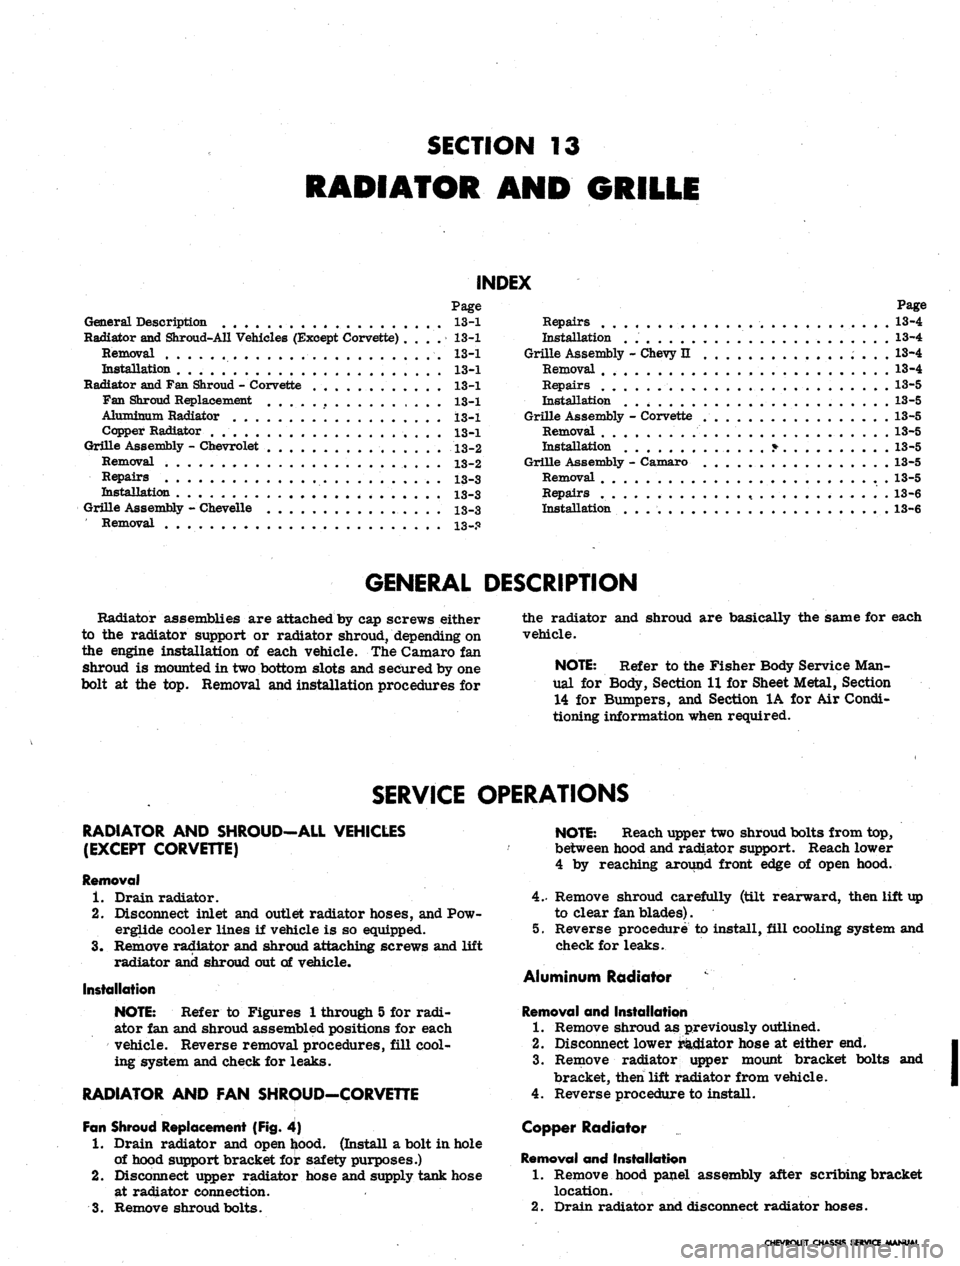 CHEVROLET CAMARO 1967 1.G Chassis Workshop Manual 
SECTION 13

RADIATOR AND GRILLE

INDEX

Page Page

General Description 13-1 Repairs 13-4

Radiator and Shroud-All Vehicles (Except Corvette) . . . . 13-1 Installation 13-4

Removal 13-1 Grille Assemb